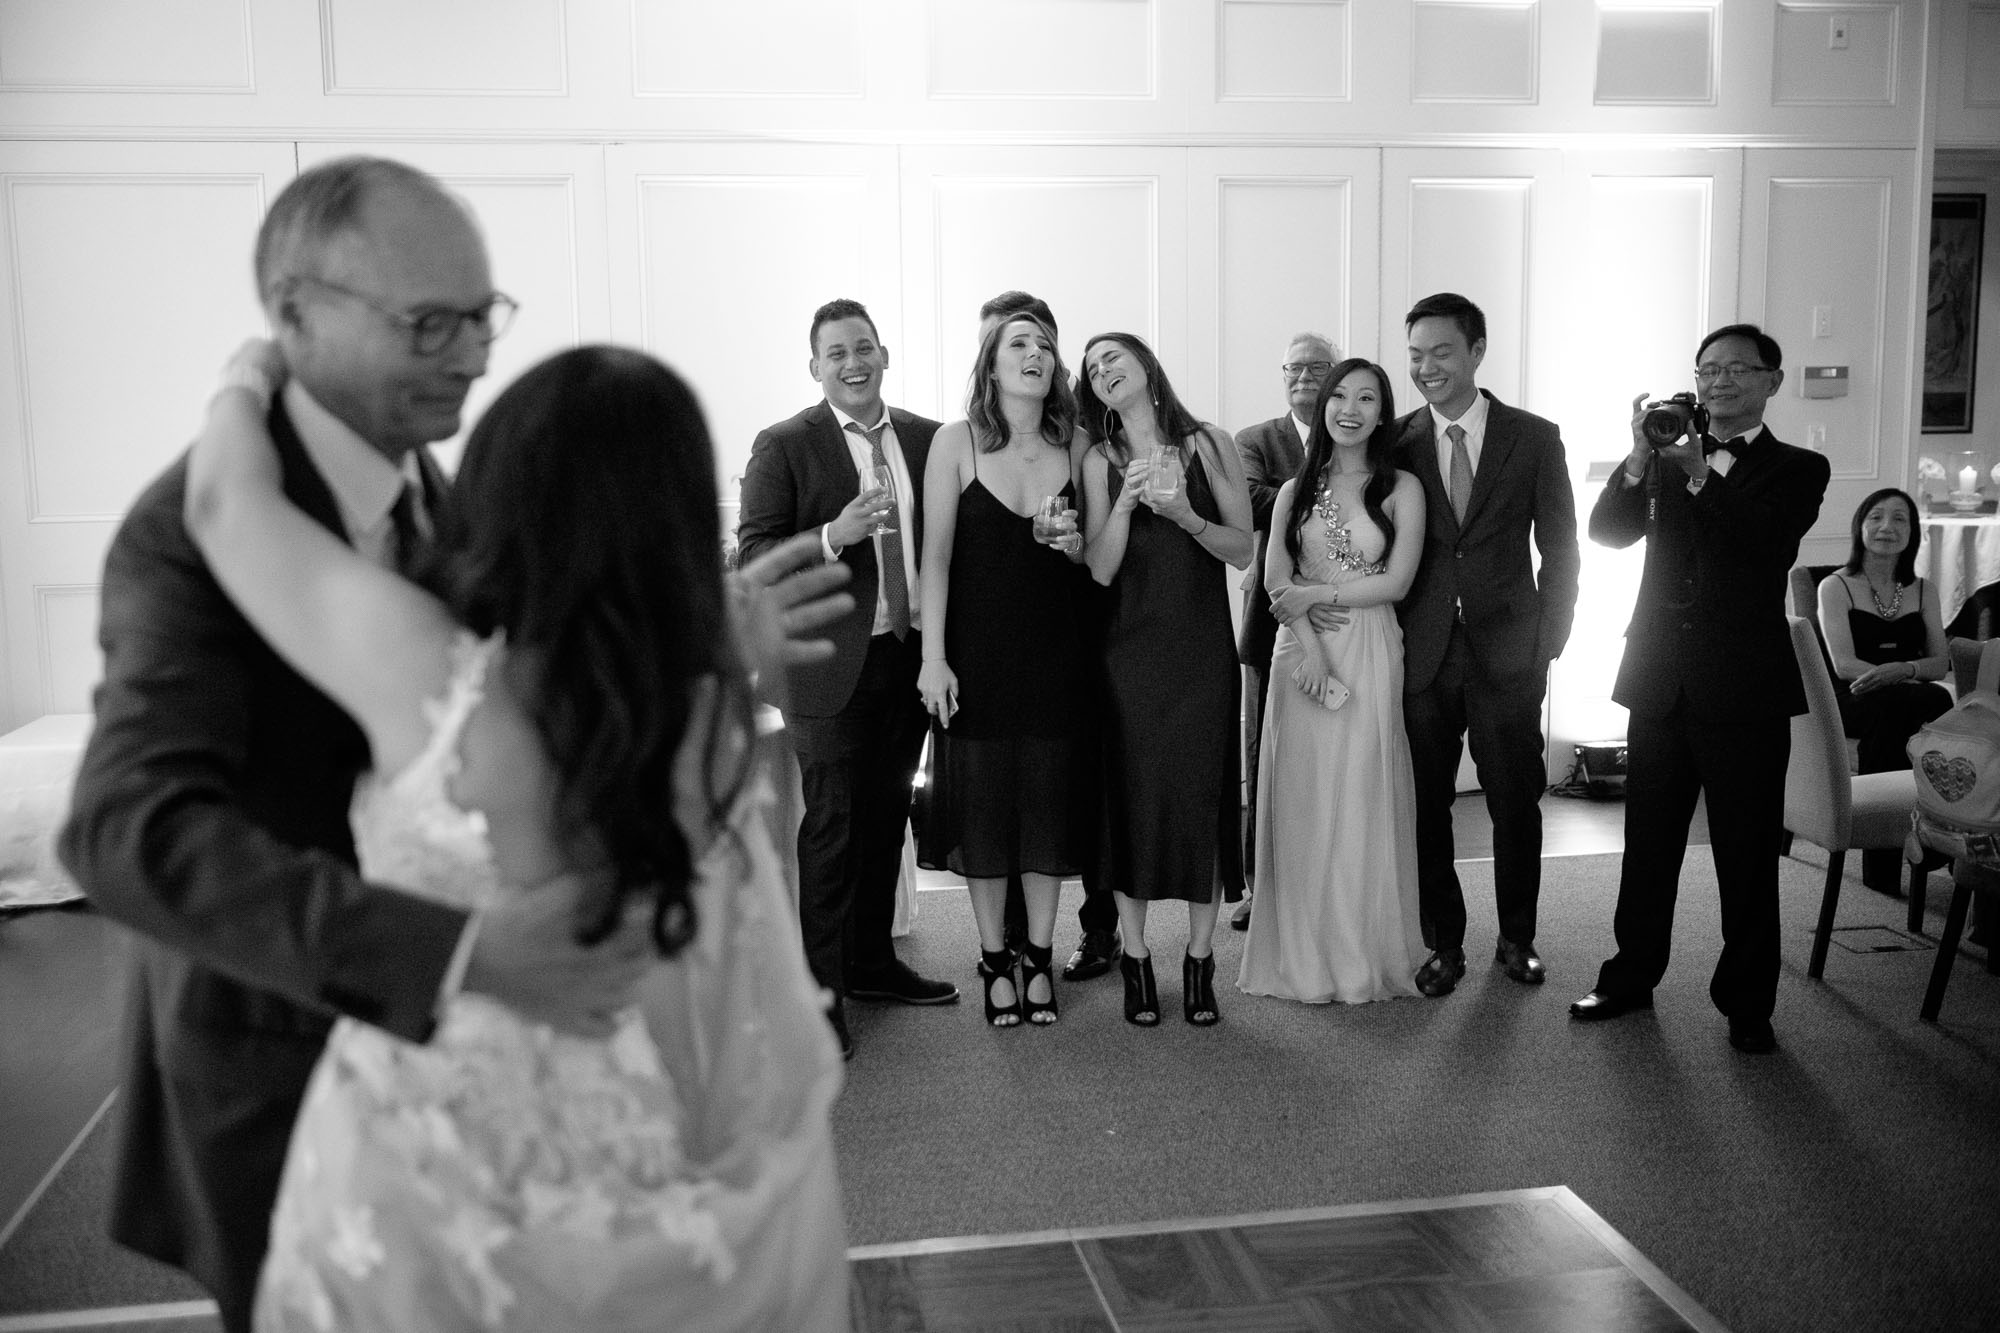  Friends and family look (and sing) along as Teresa + Robert enjoy their first dance as a newly married couple during their wedding reception at Langdon Hall in Cambridge, Ontario. 